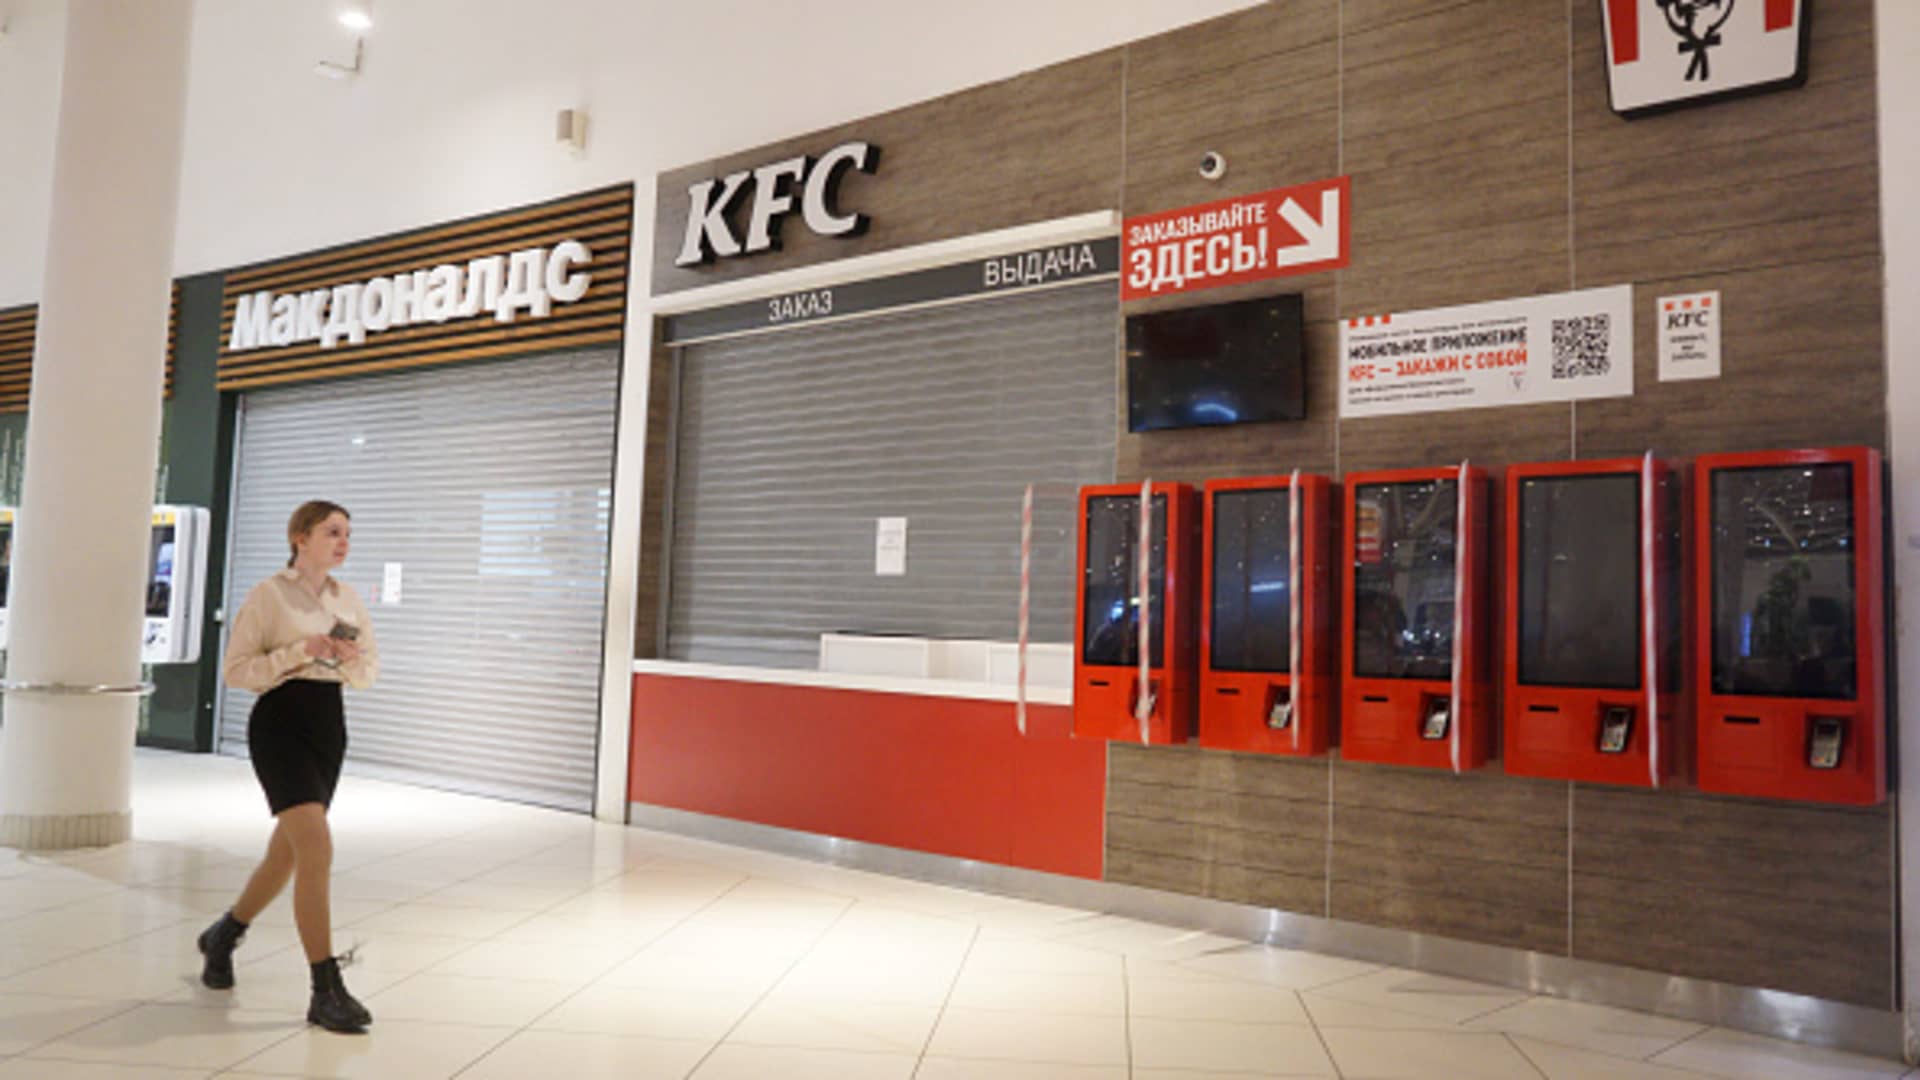 Yum Brands says it is close to selling its Russian KFC business